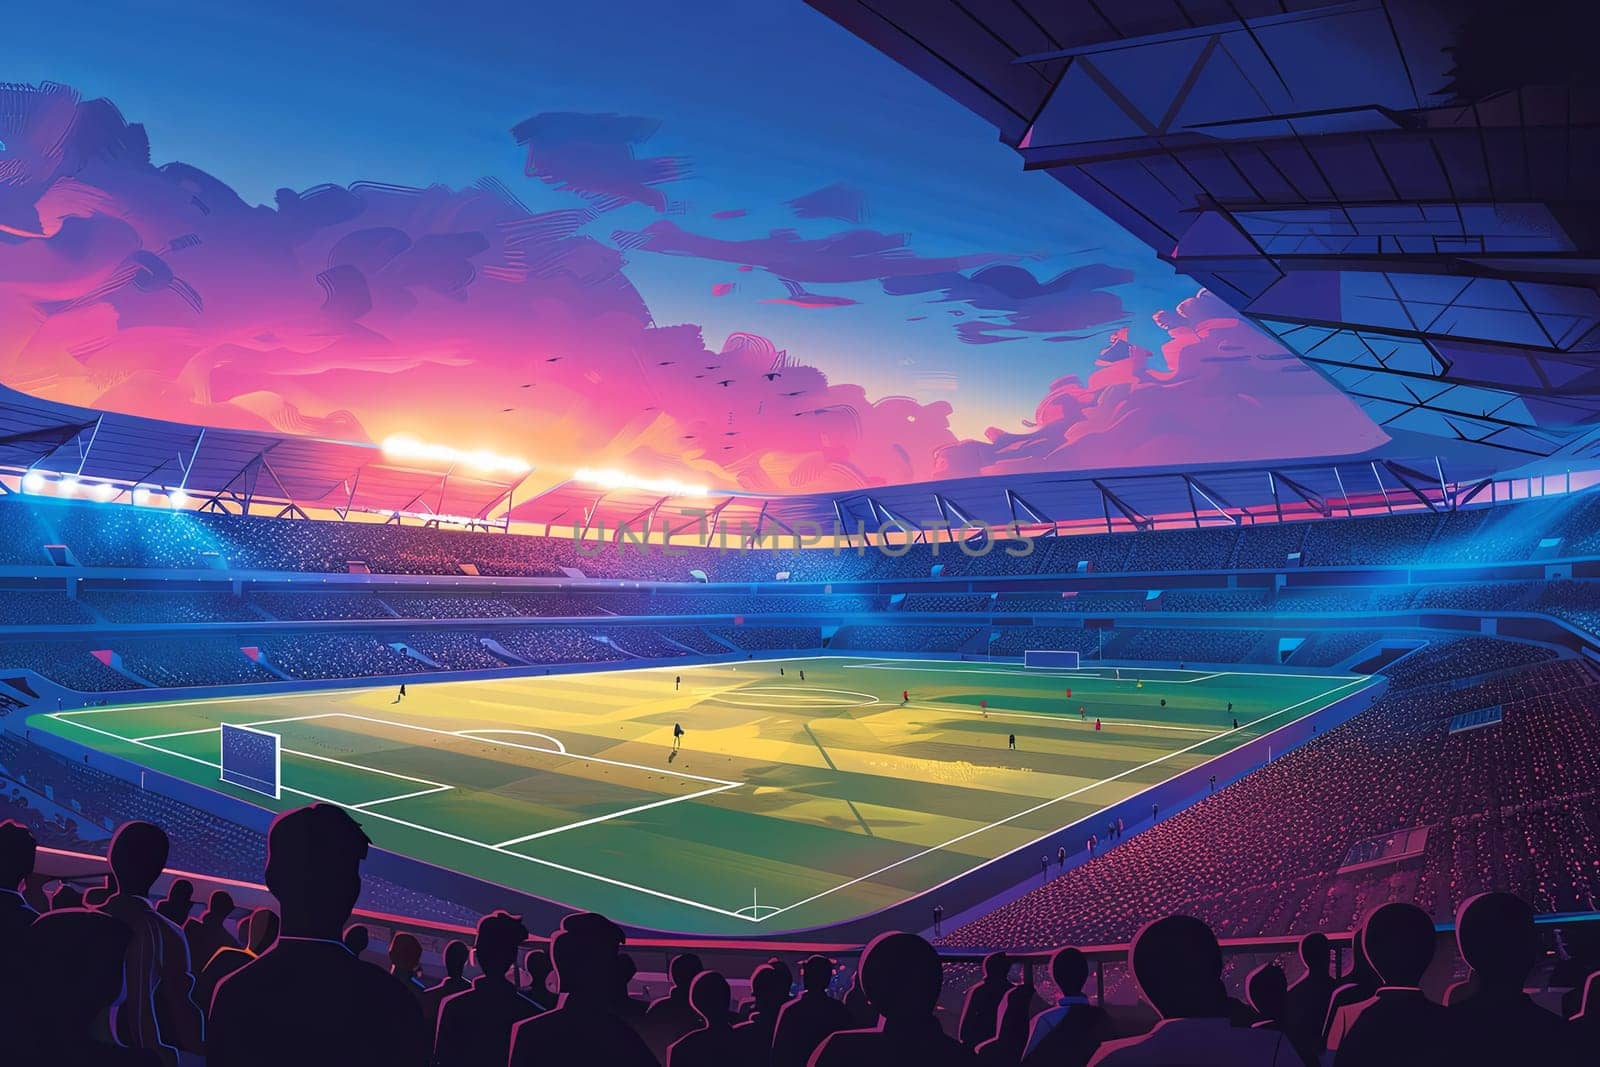 A lively soccer stadium filled with cheering fans at sunset, capturing the excitement of a football match.